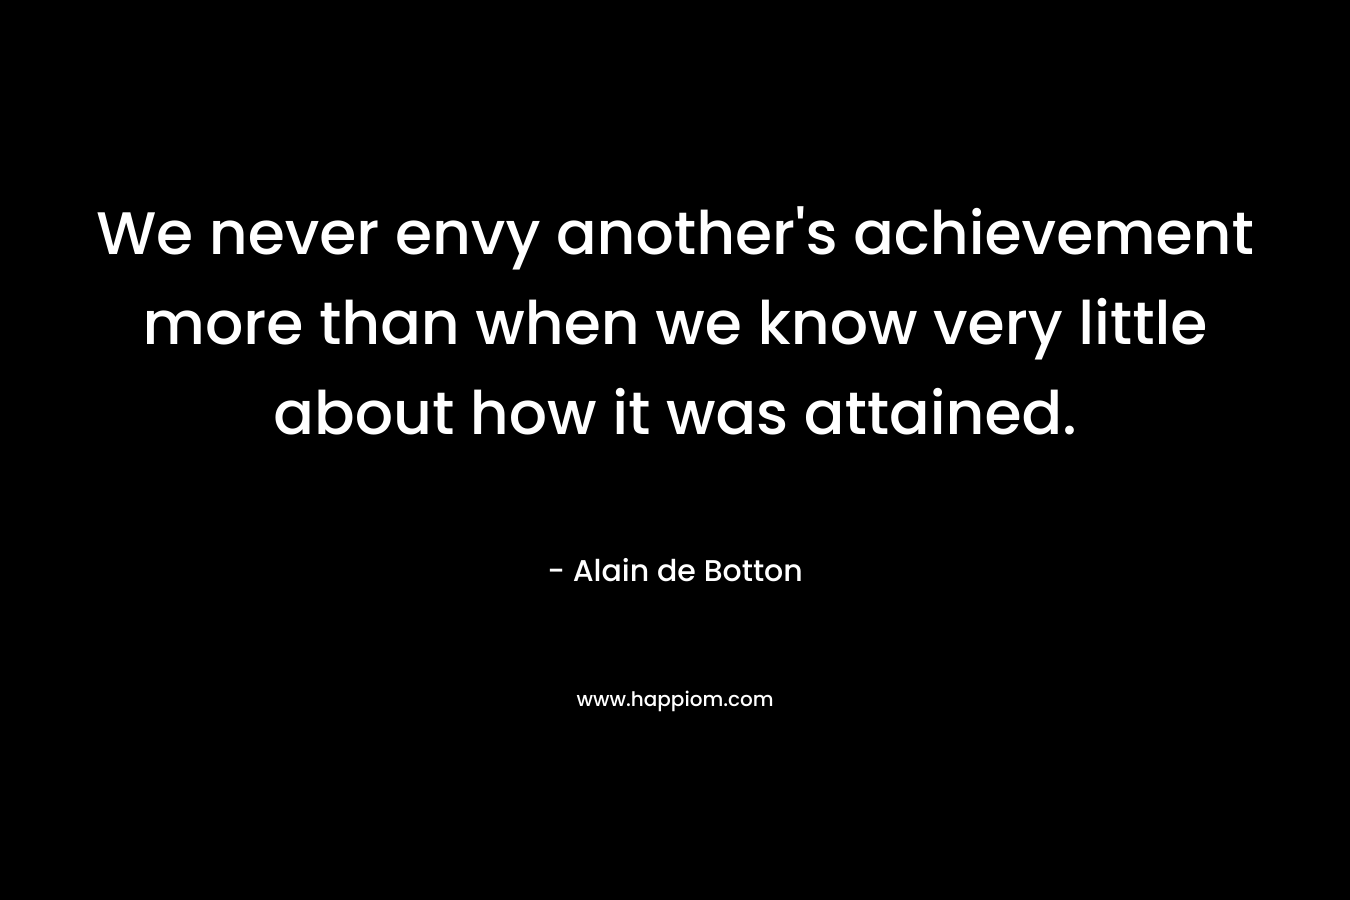 We never envy another's achievement more than when we know very little about how it was attained.